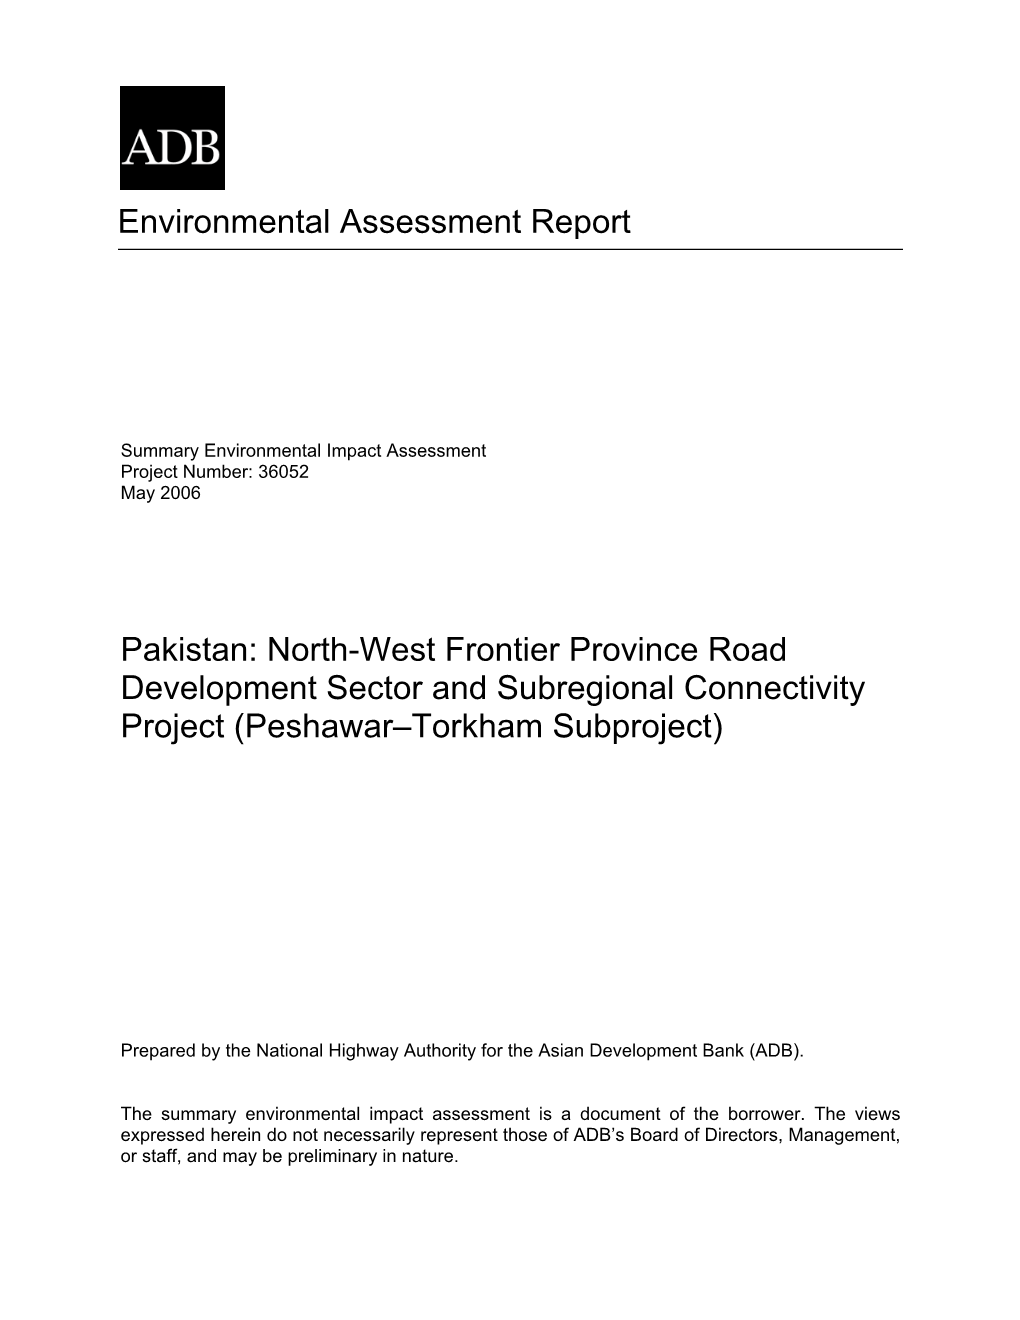 Pakistan: North-West Frontier Province Road Development Sector and Subregional Connectivity Project (Peshawar–Torkham Subproject)